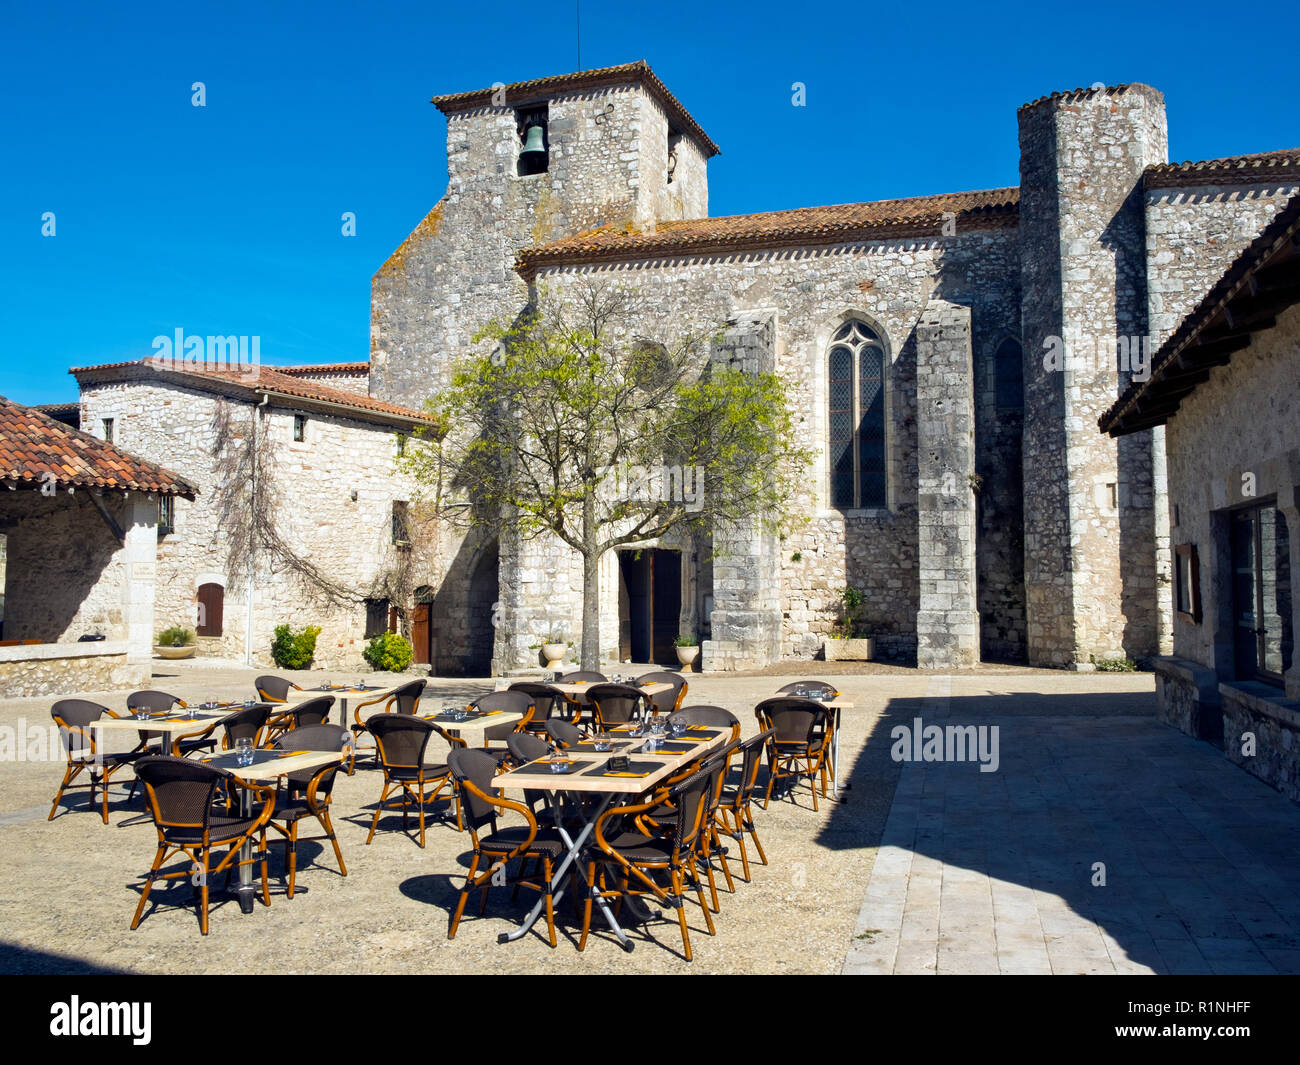 Restaurant tables prepared for lunchtime in the square in Pujols, Lot-et-Garonne, France. This historic fortified village stronghold is now a member of 'Les Plus Beaux Villages de France' association. Stock Photo